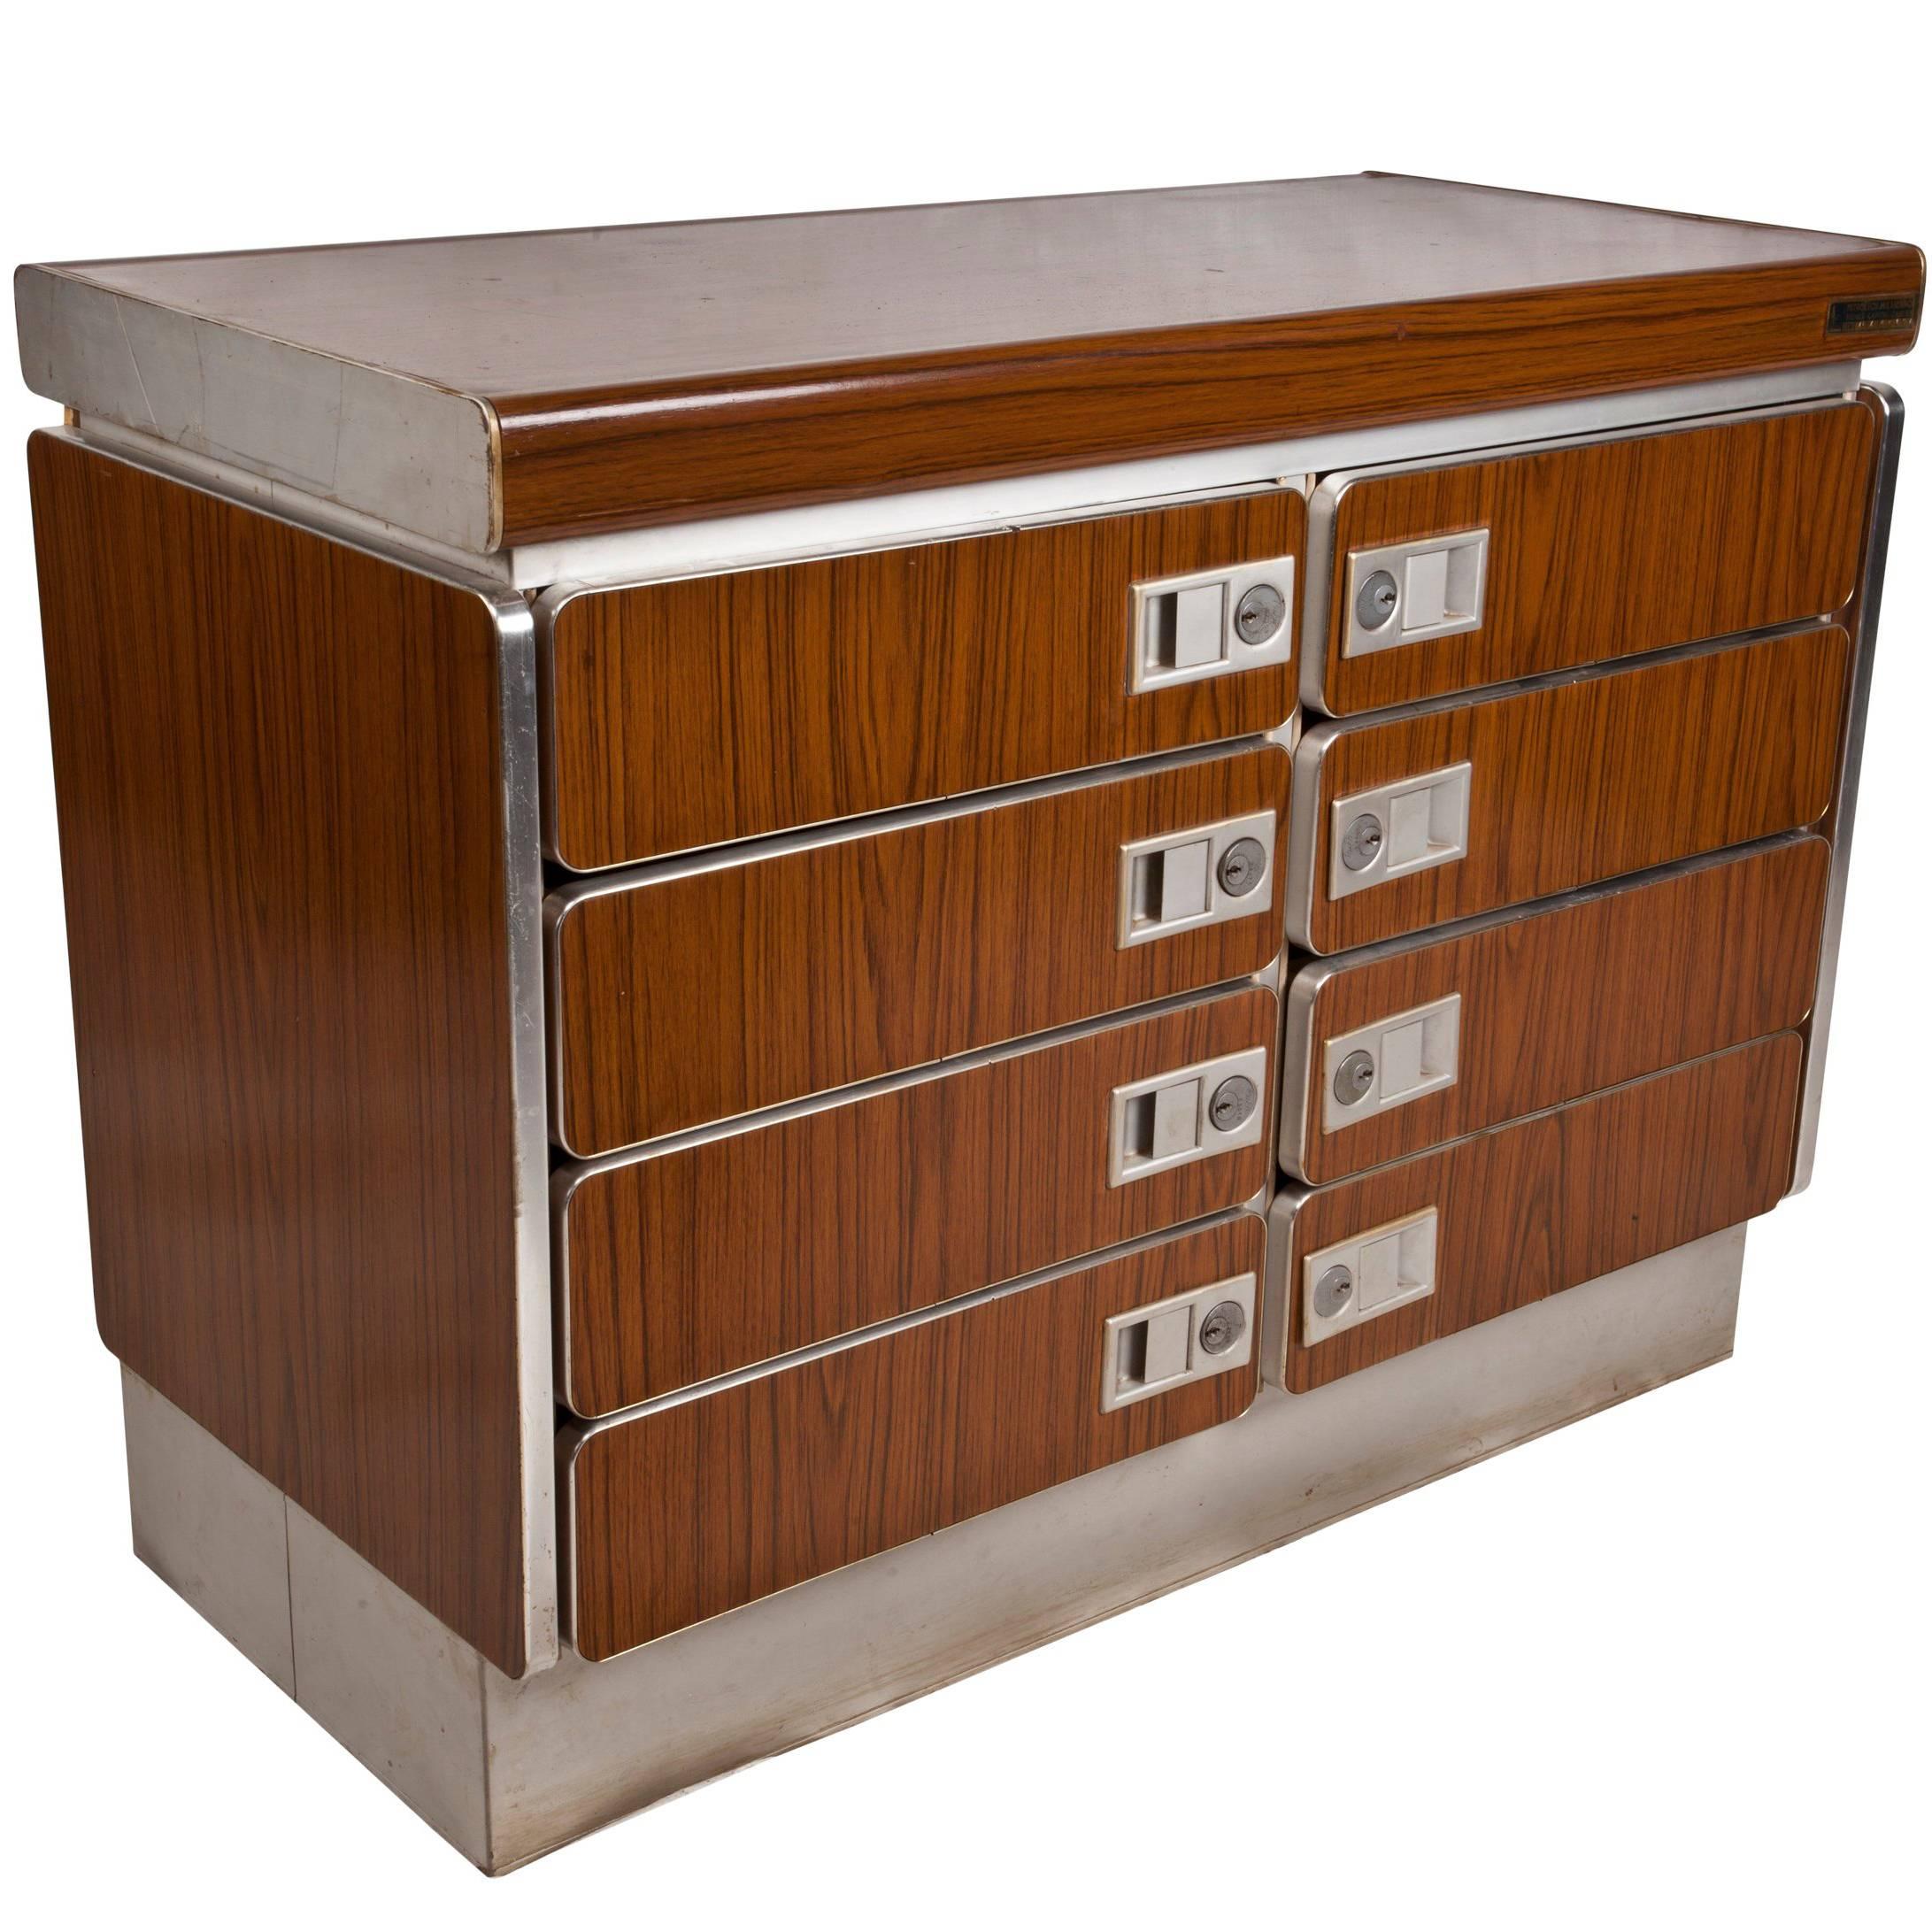 Rare Teak and Chrome Nautical Chest from Ship's Stateroom, Midcentury